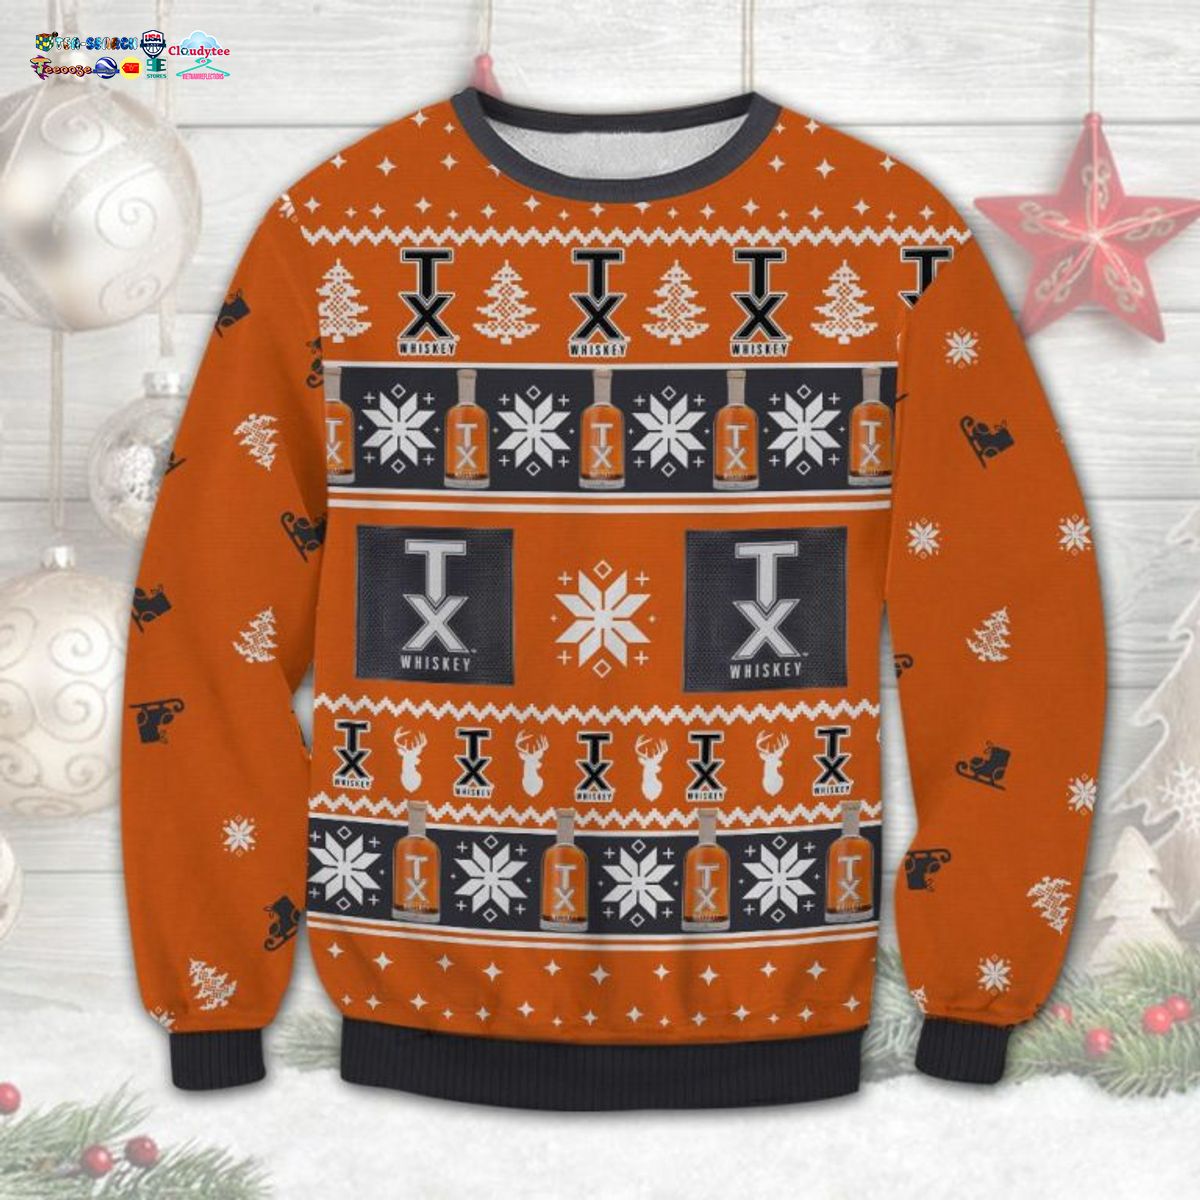 TX Blended Whiskey Ugly Christmas Sweater